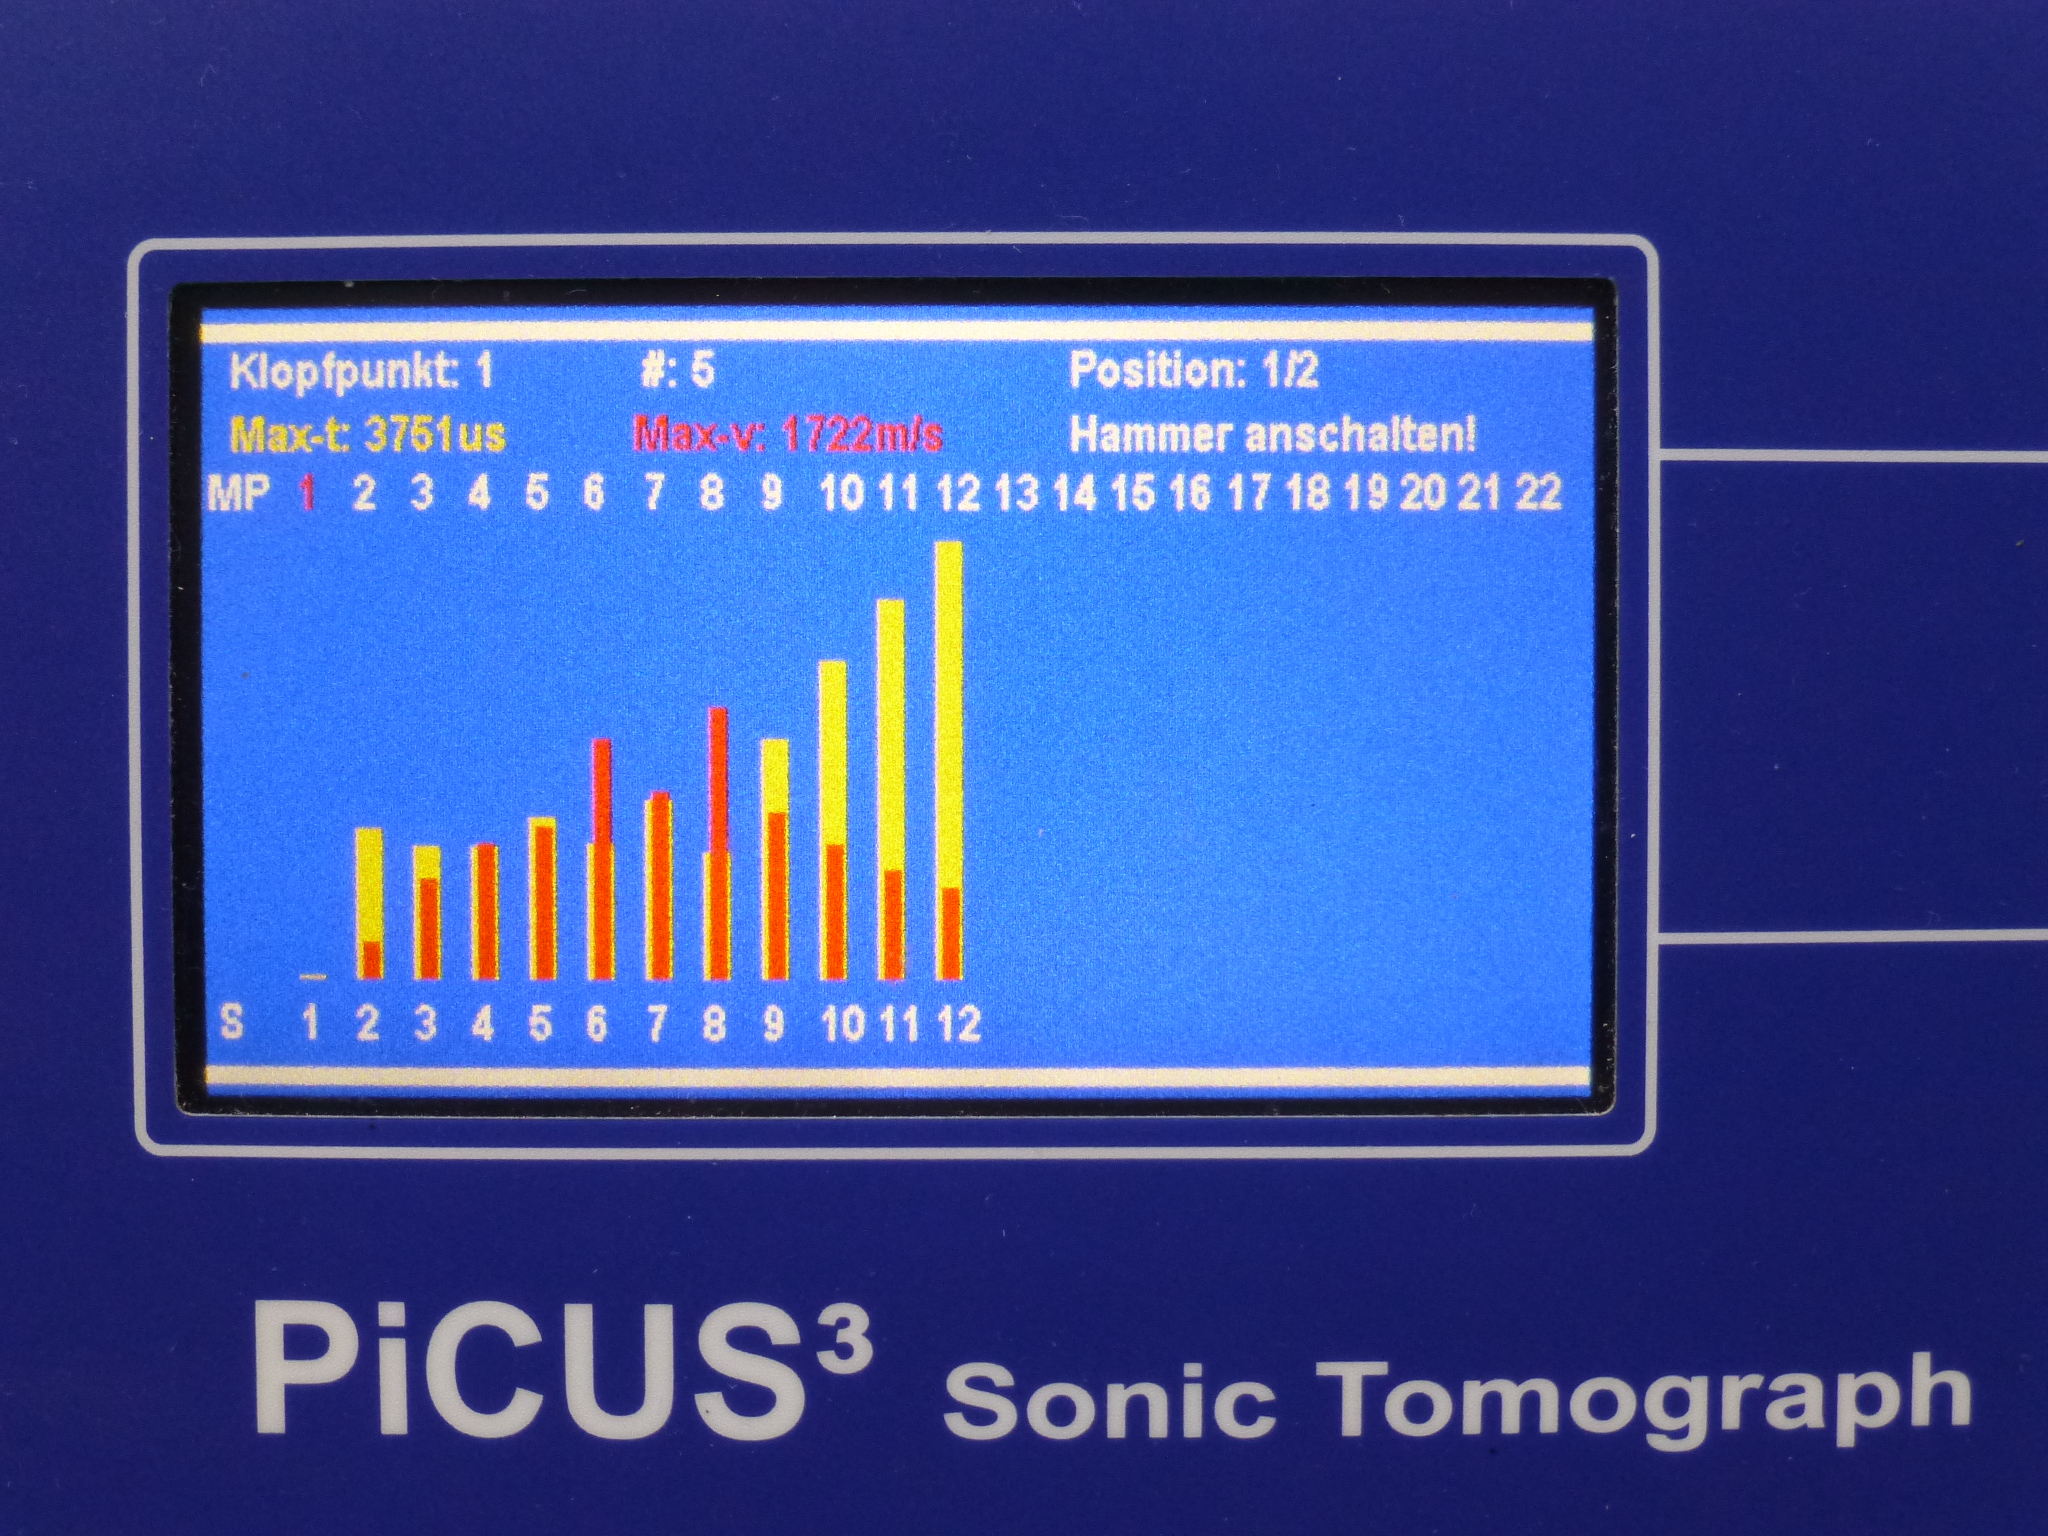 May-chup-cat-lop-kiem-tra-khuyet-tat-than-go-argus-picus-sonic-tomograph-3